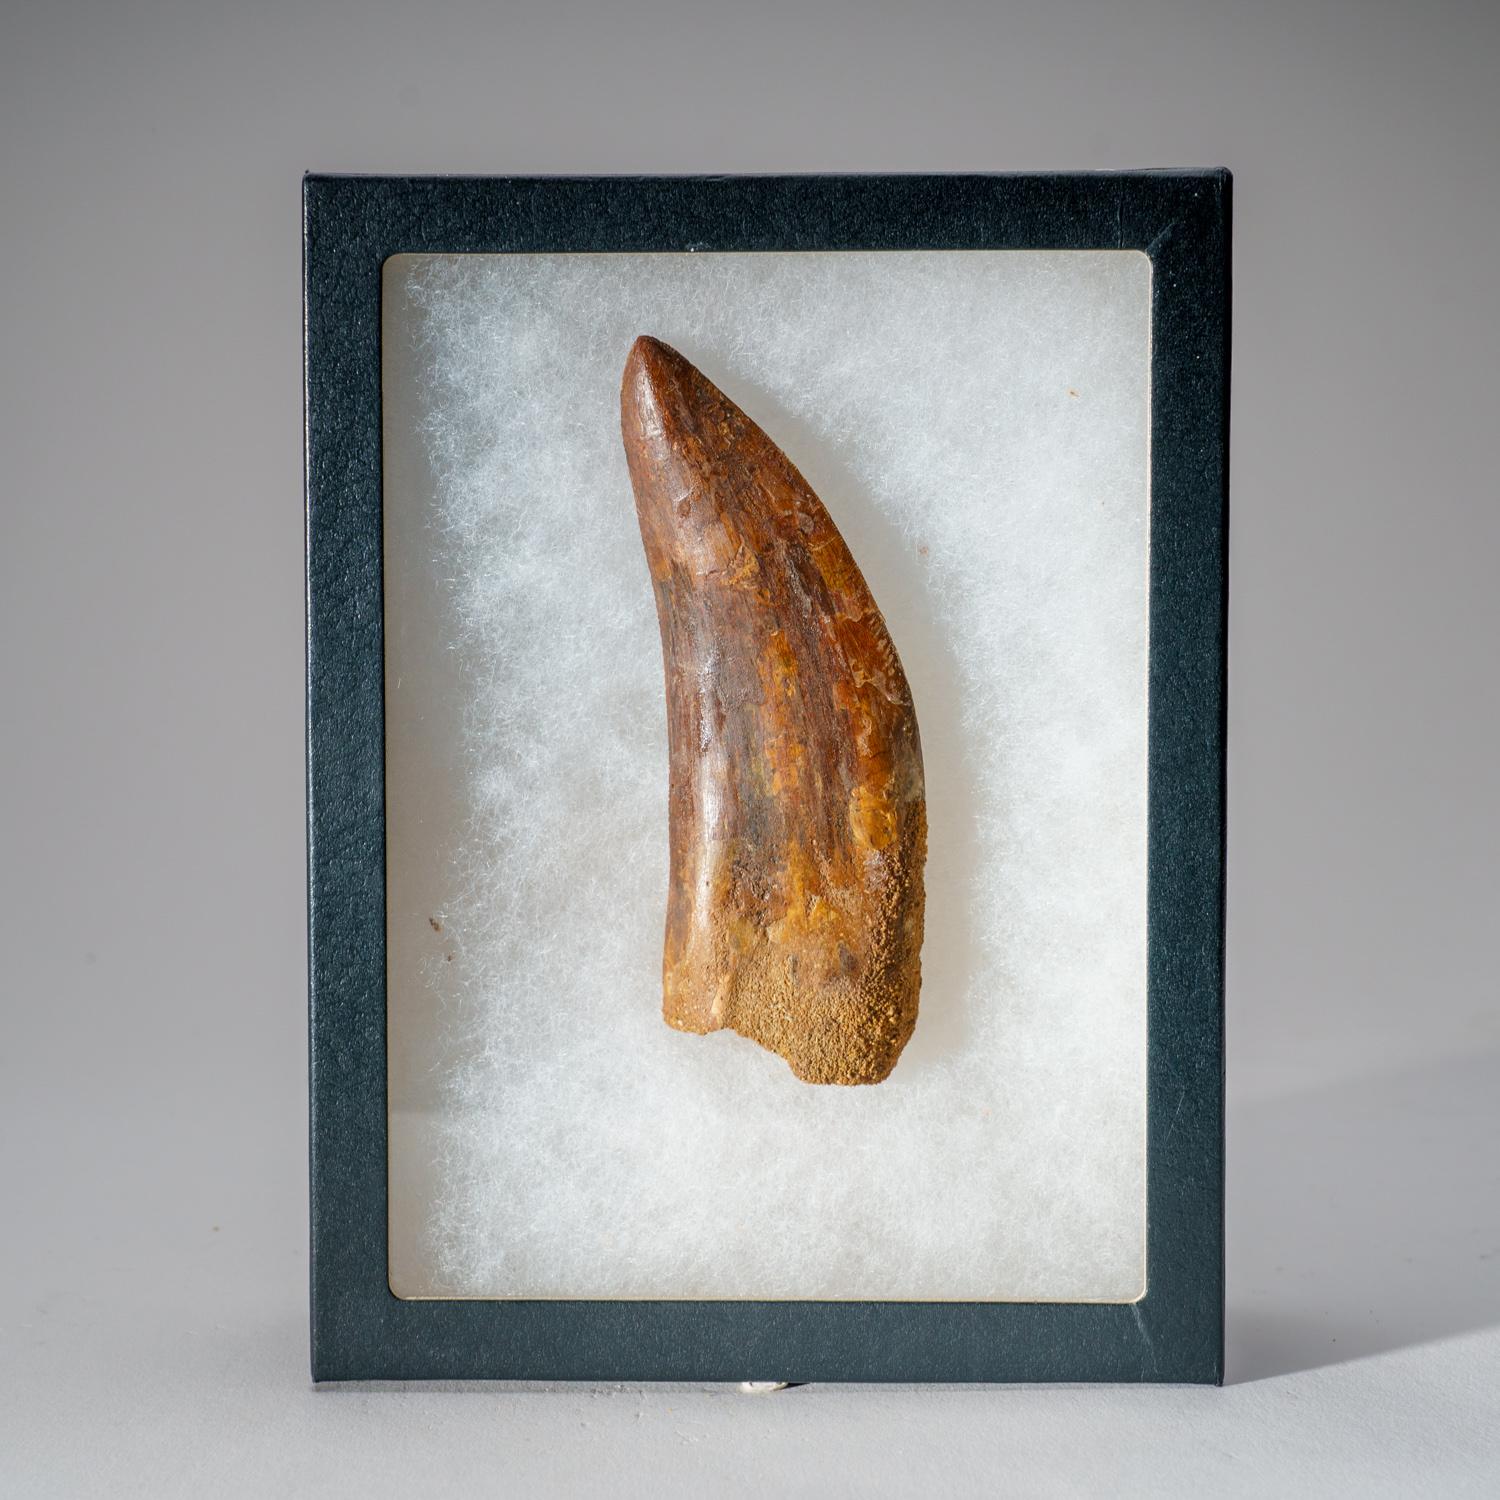 Egyptian Genuine Carcharodontosaurus Tooth in Display Box (114 grams) For Sale